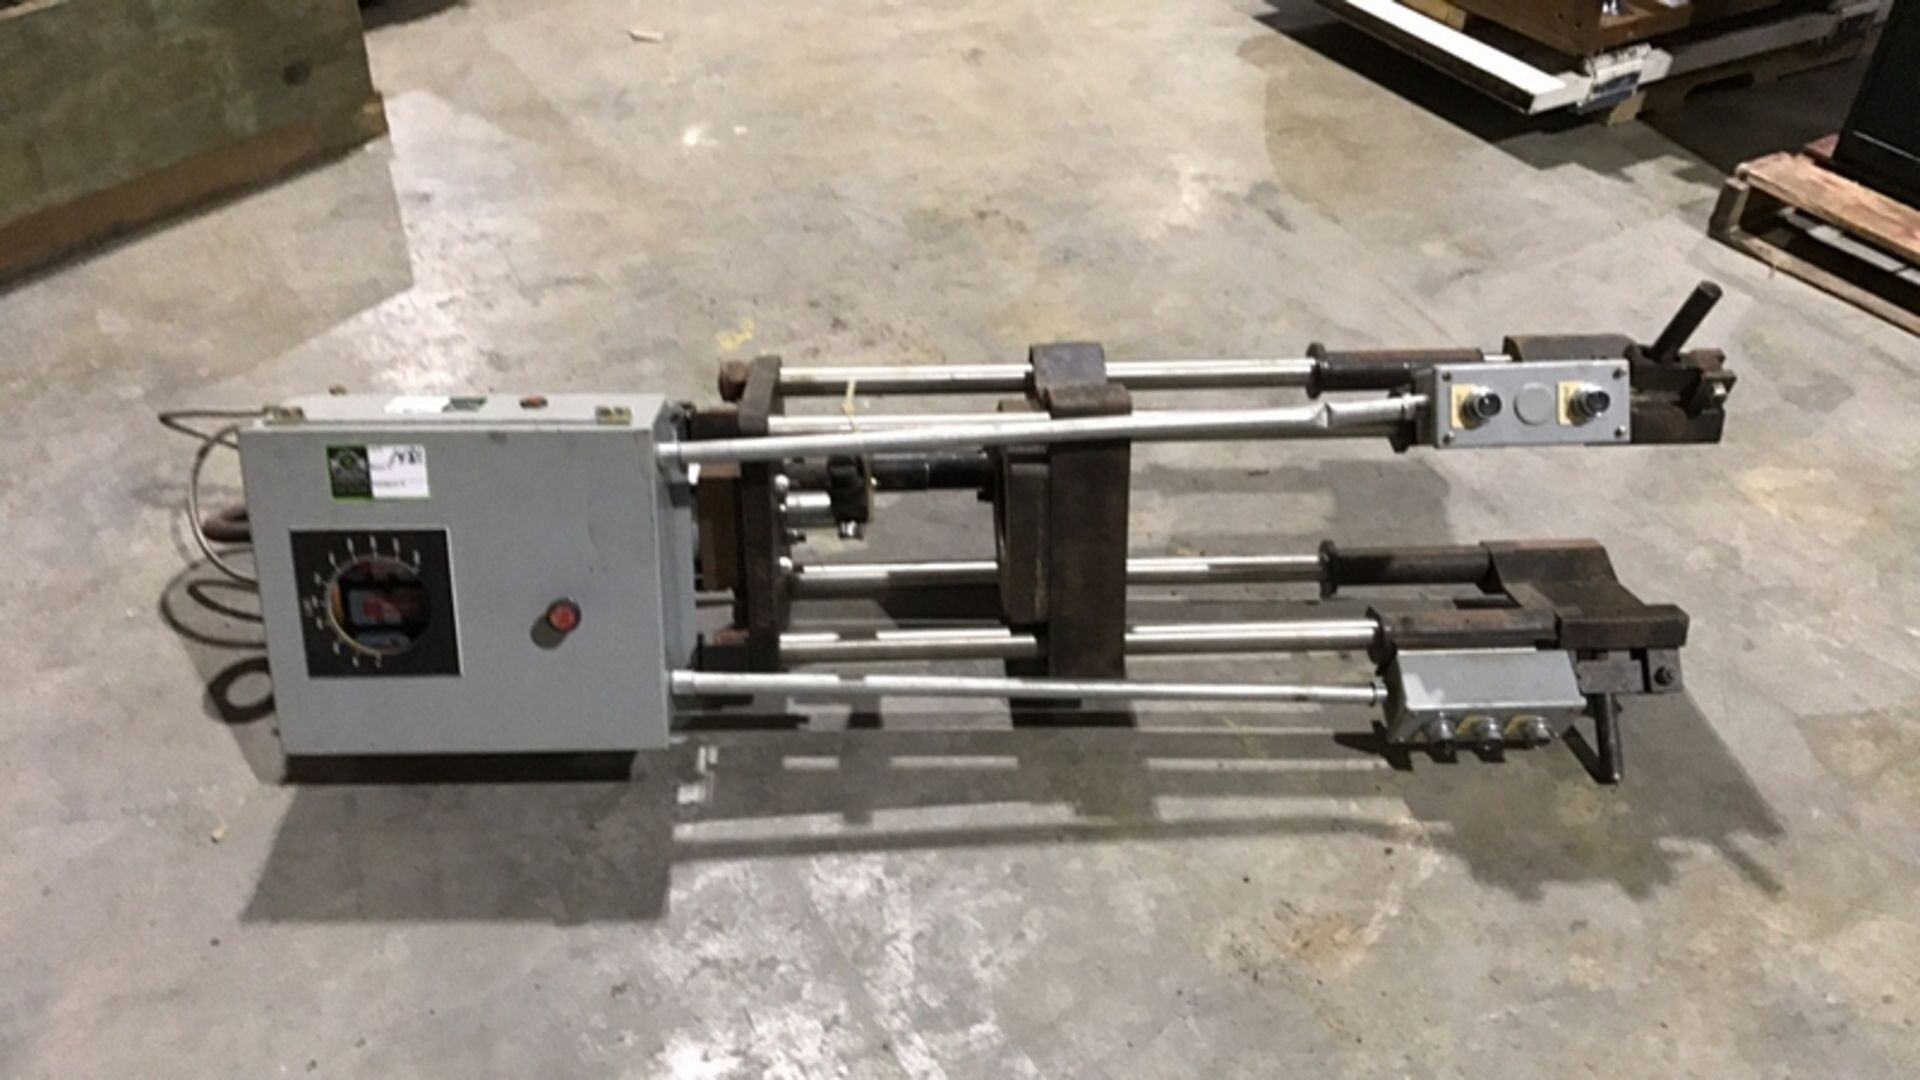 Hydraulic Tensioner- ***Located in Chattanooga, TN*** MFR - Unknown 69" Tall